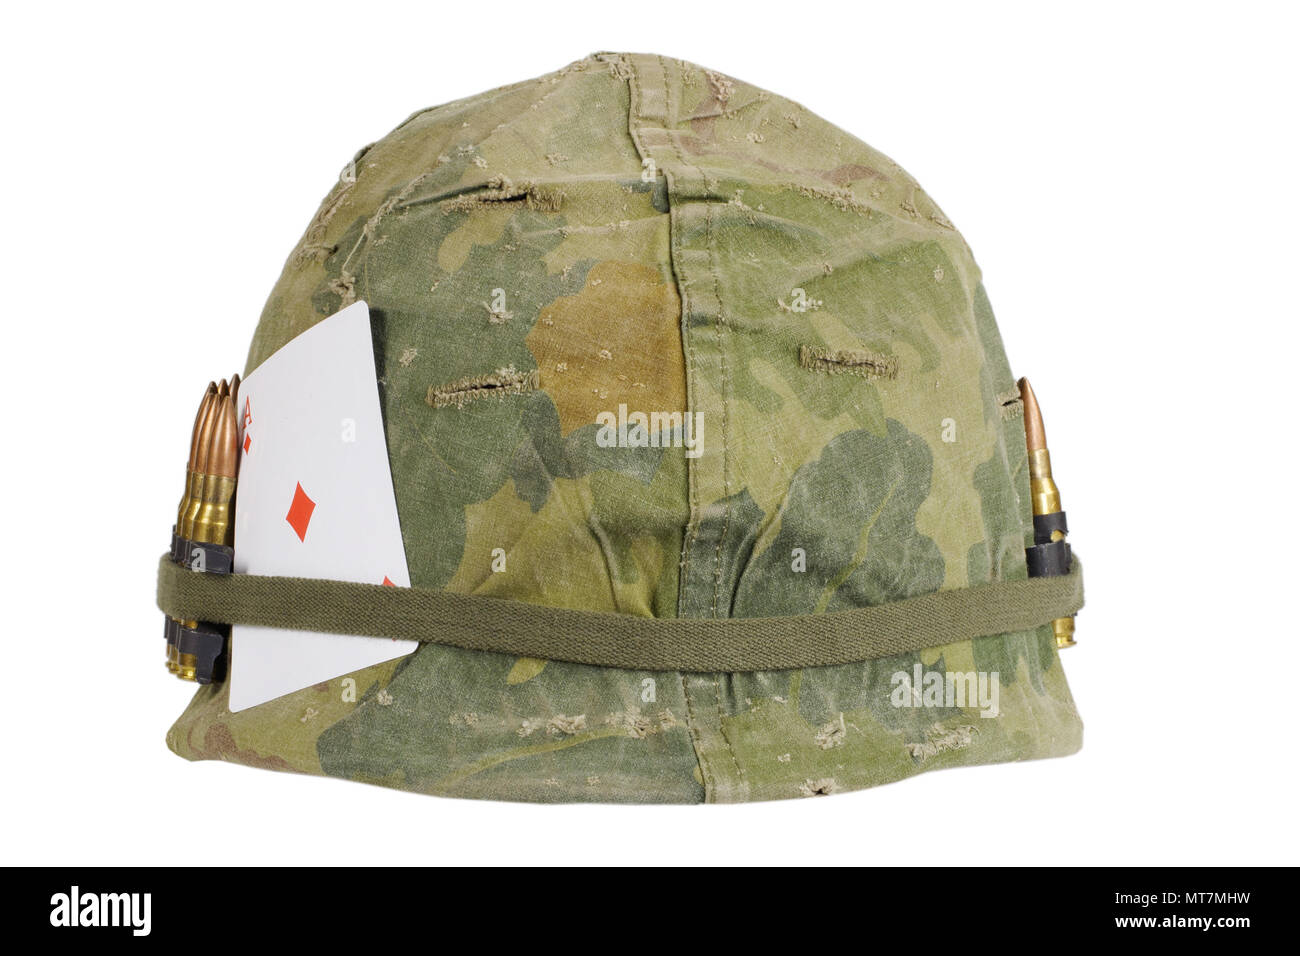 M1 Helmet Vietnam High Resolution Stock Photography and Images - Alamy